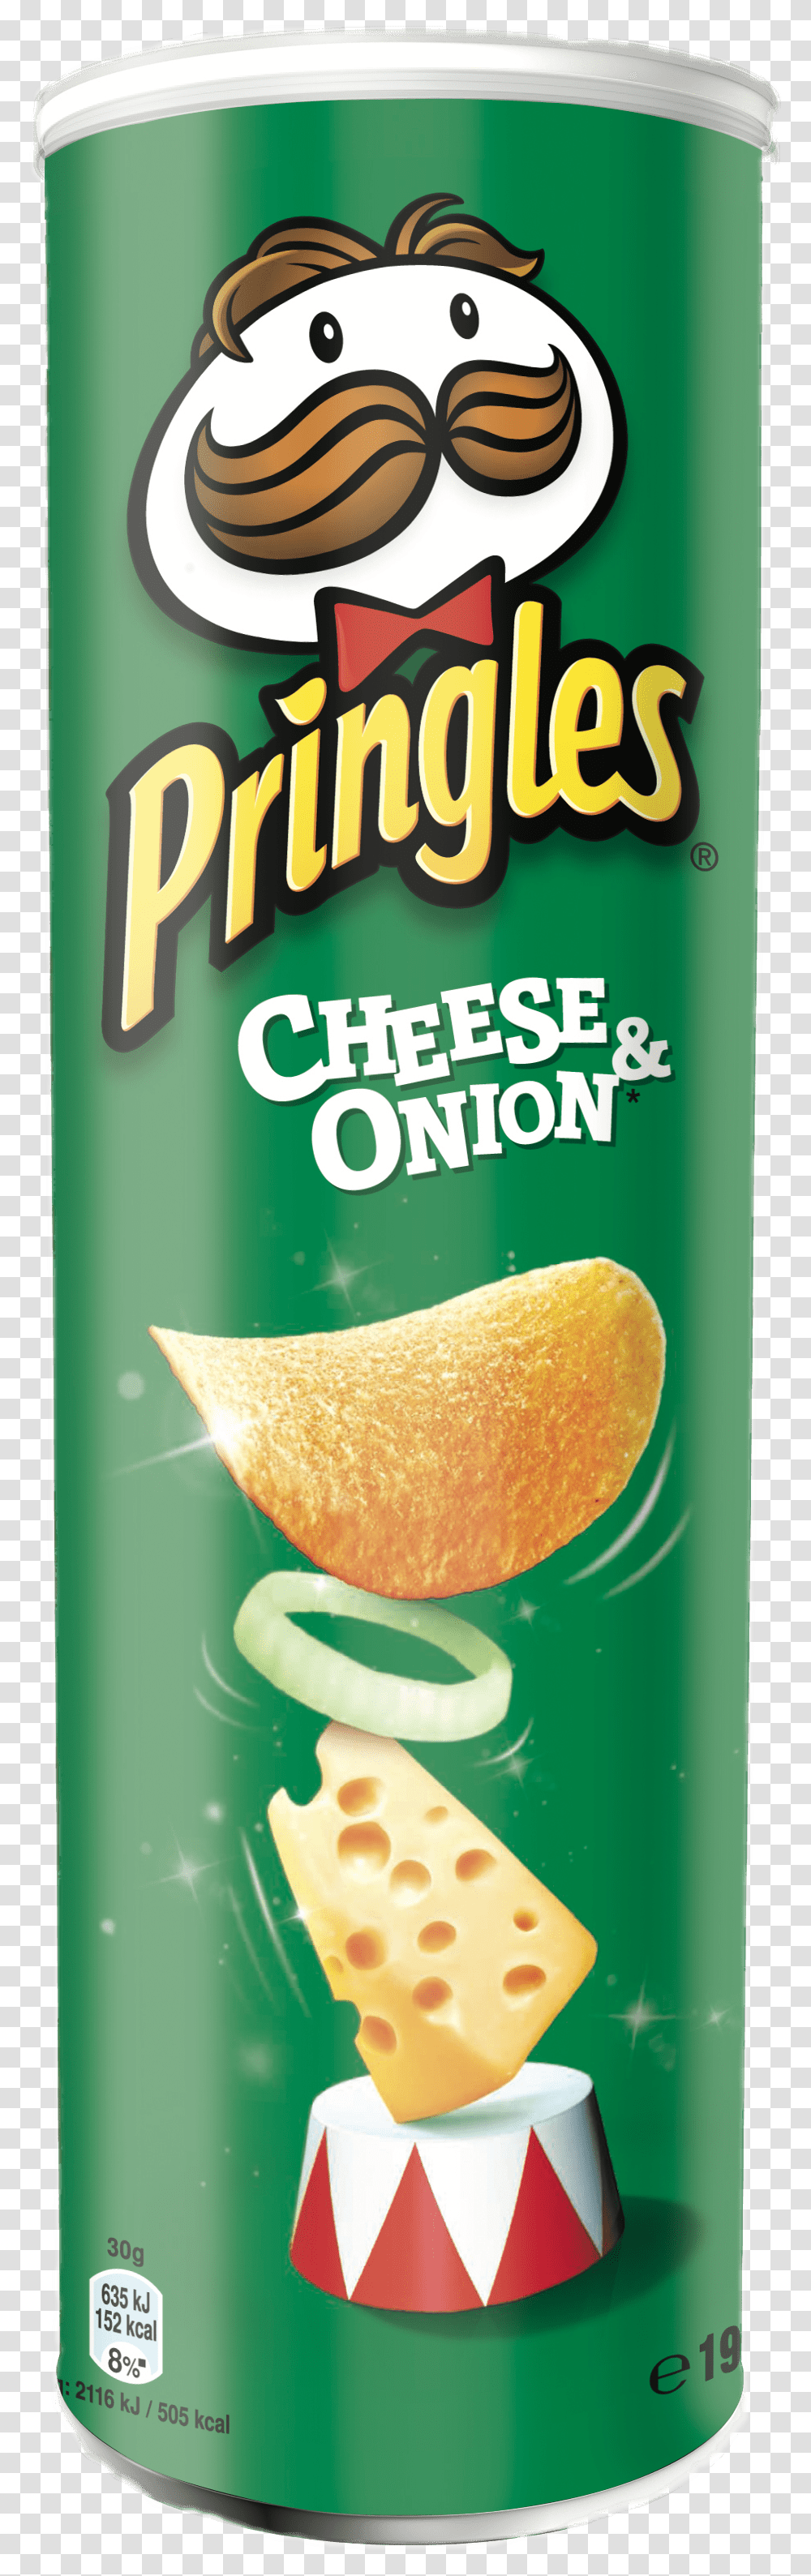 Pringles Cheeseamponions Pringles Texas Bbq Sauce, Beverage, Food, Tin, Can Transparent Png